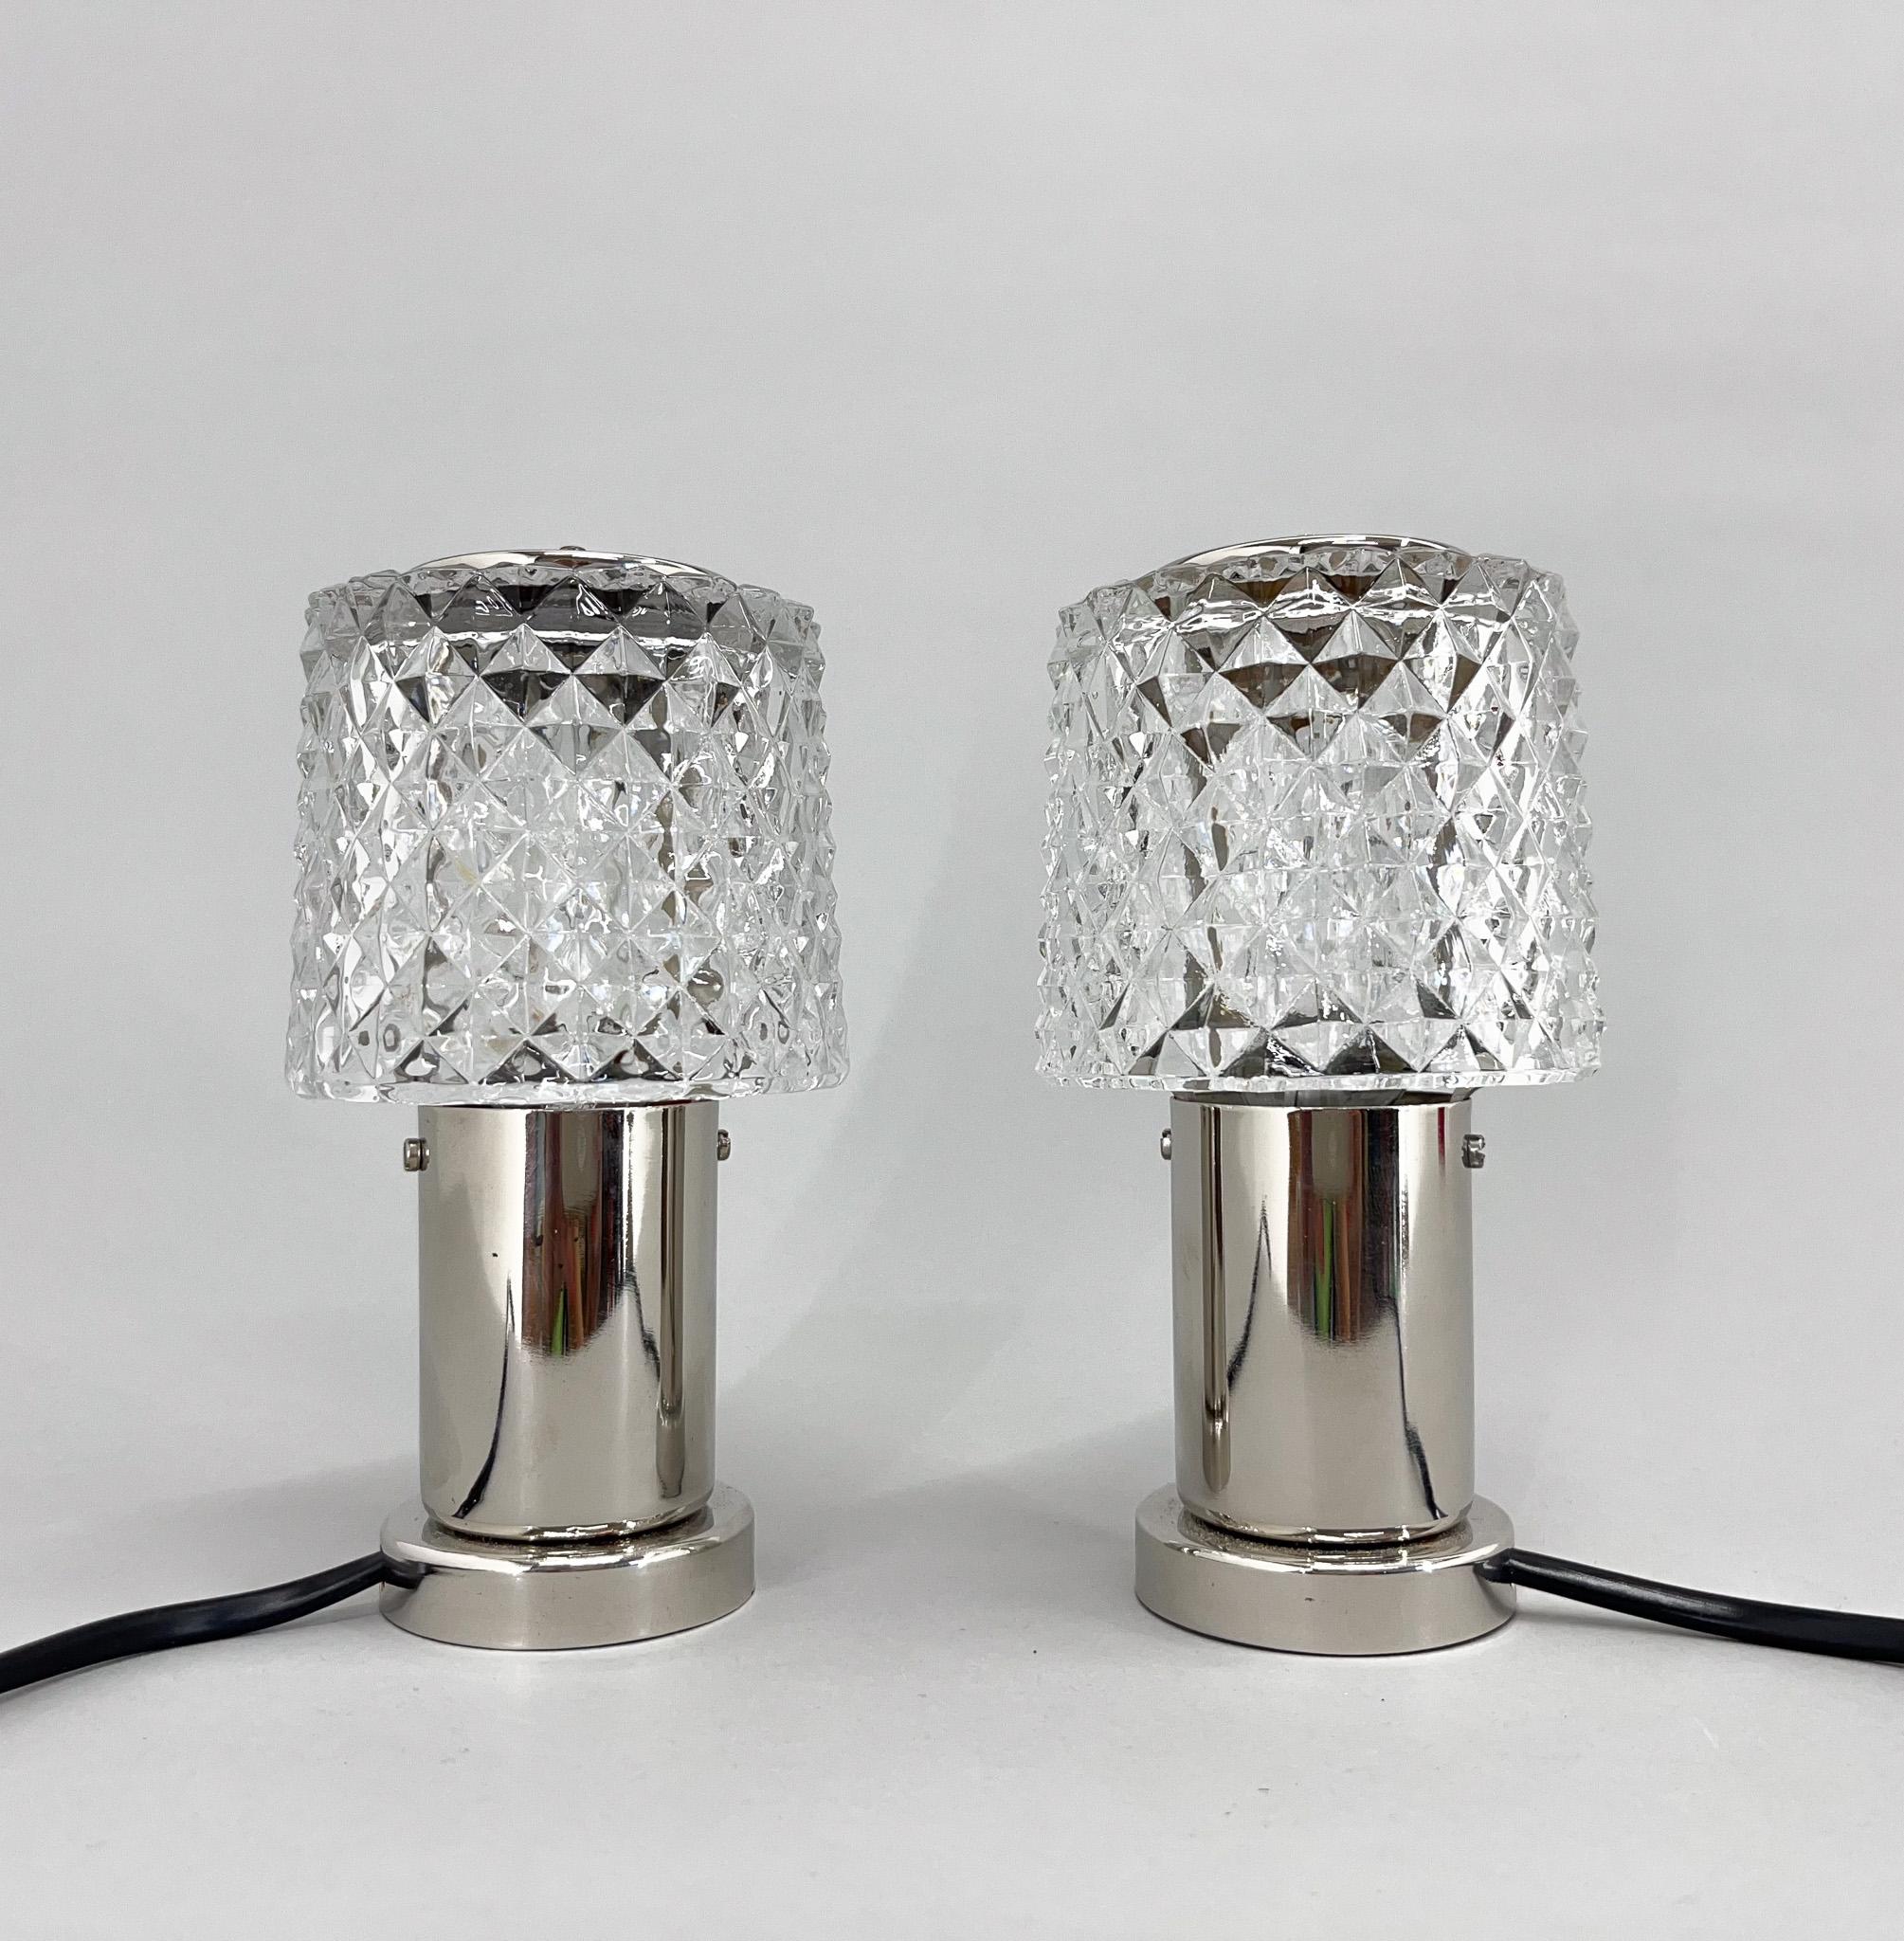 Set of two small table or bedside lamps by famous Kamenicky Senov Glassworks. Produced in former Czechoslovakia in the 1960's.The lamps were restored and rewired. There are four pairs available. Bulb: 2x1 E14-E15 bulbs. US plug adapter included.